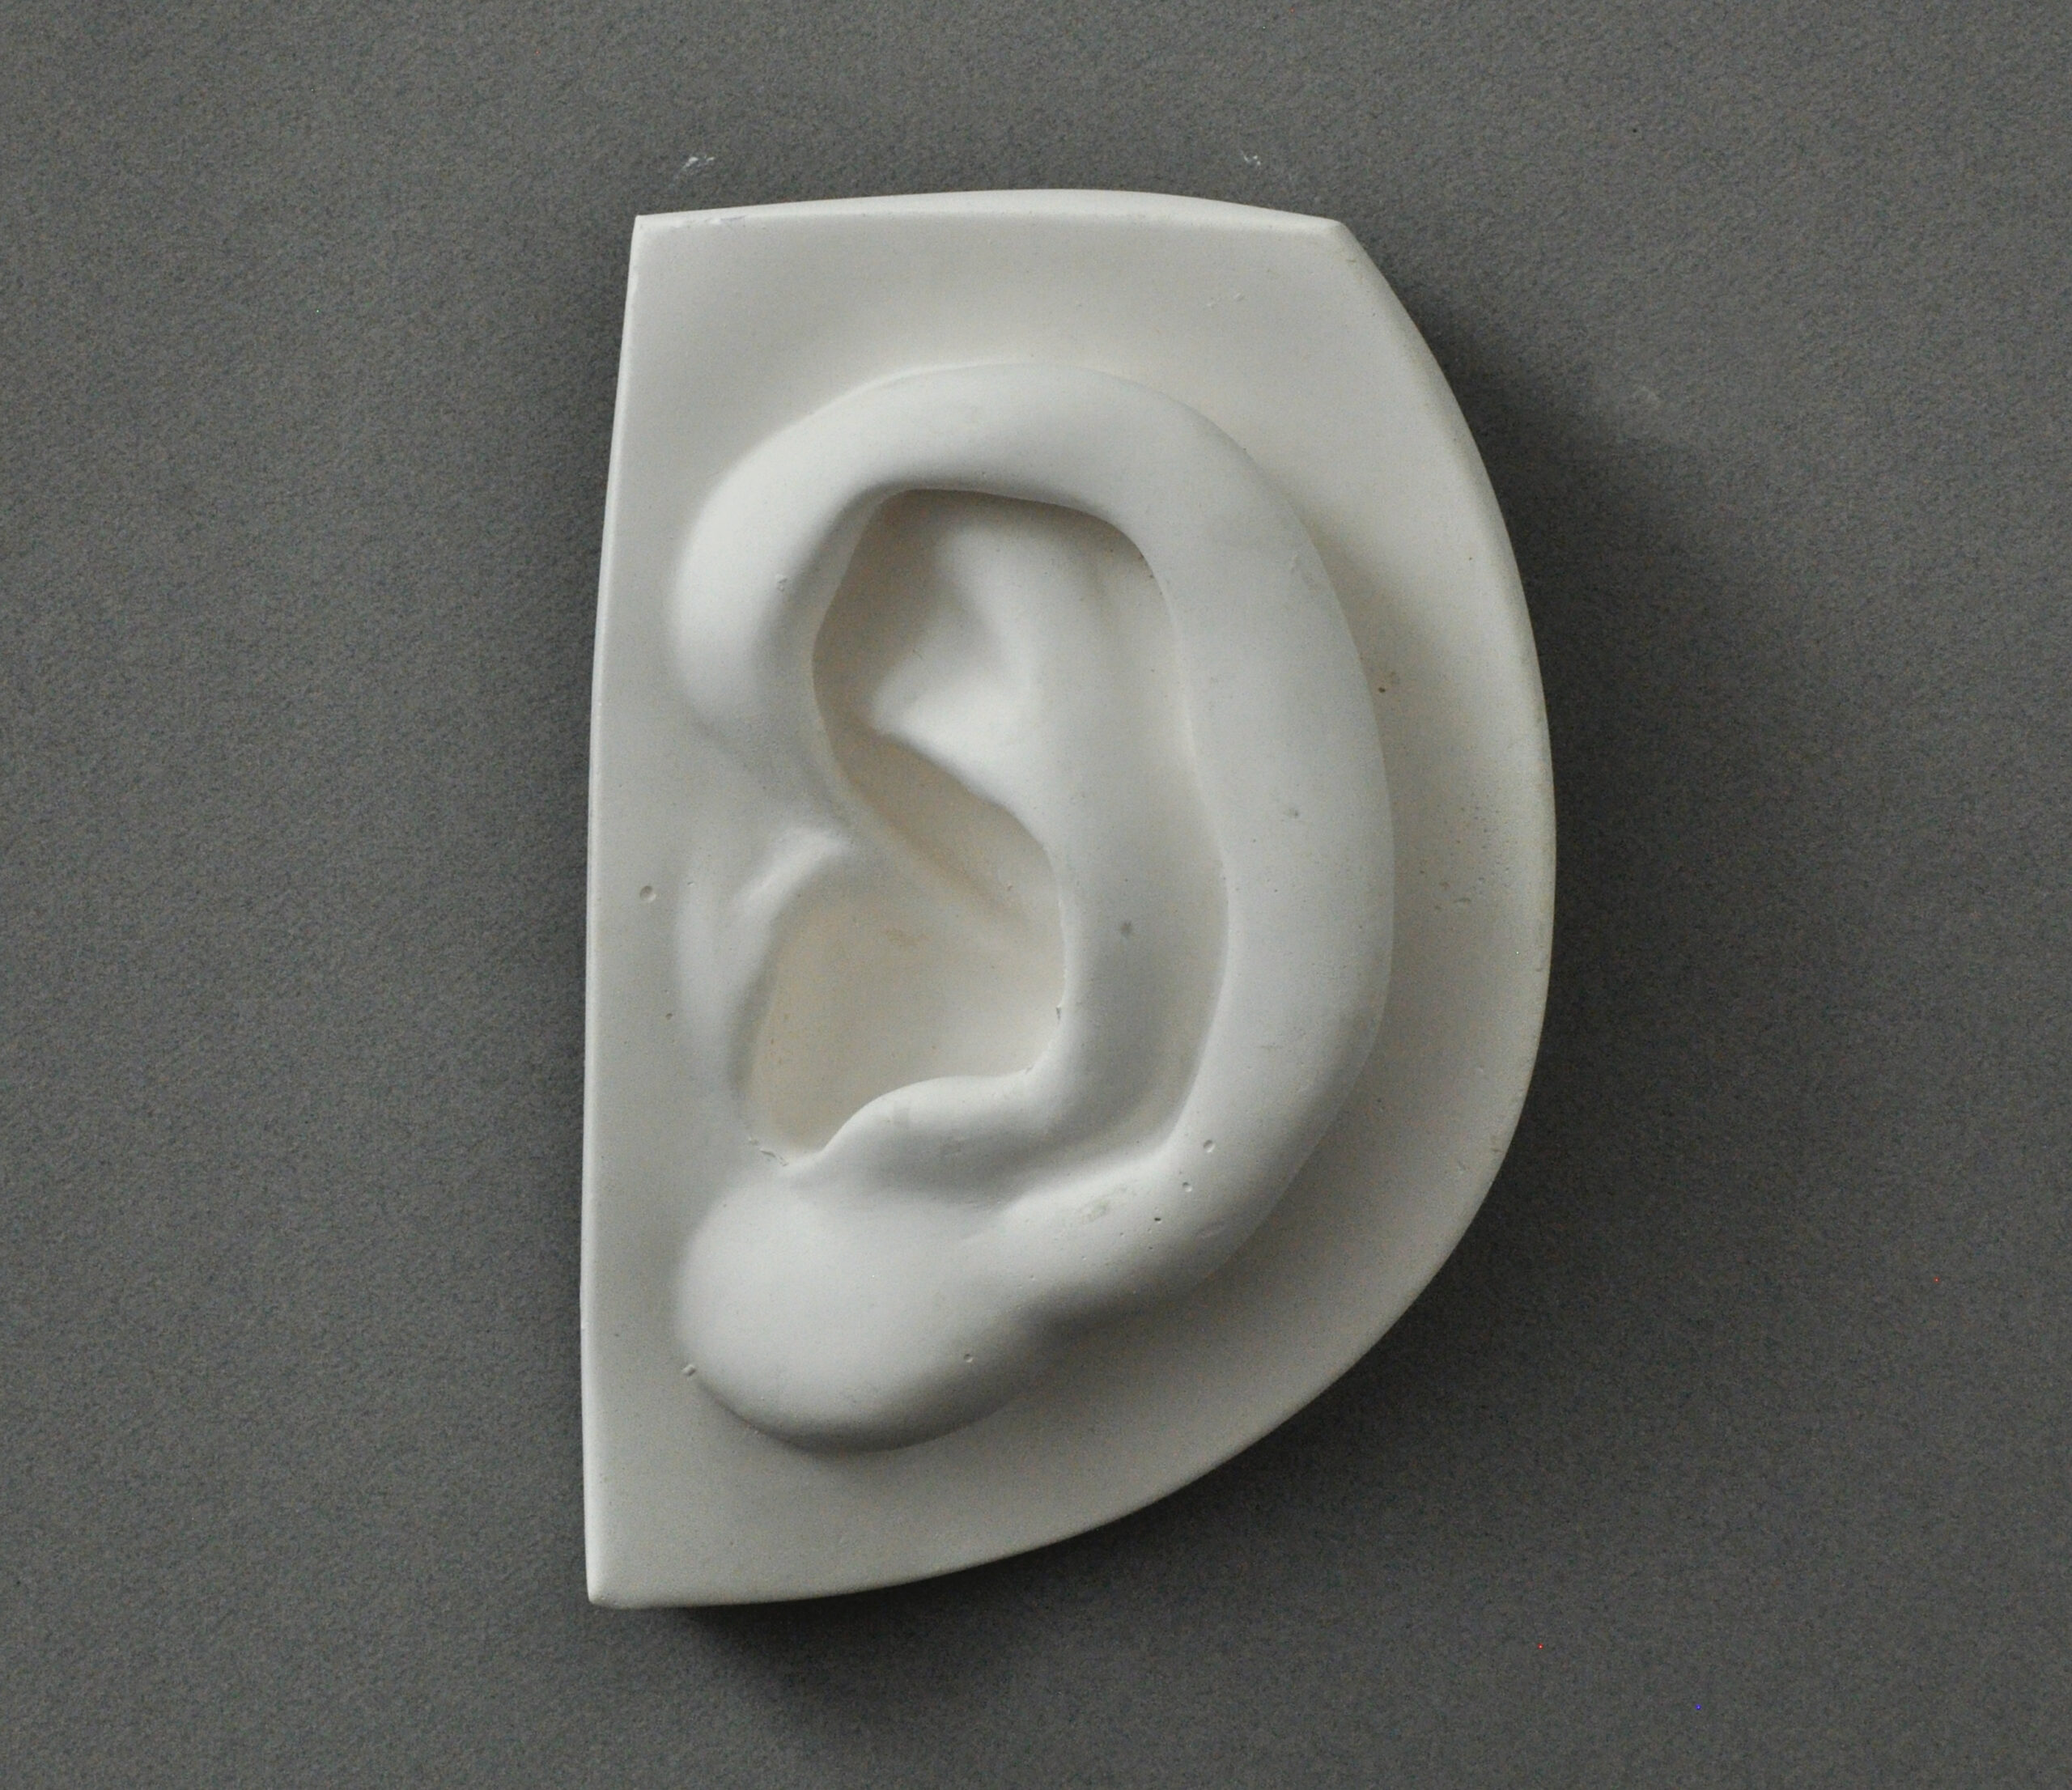 Plaster cast of Michelangelos David ear from the front, used in traditional drawing courses